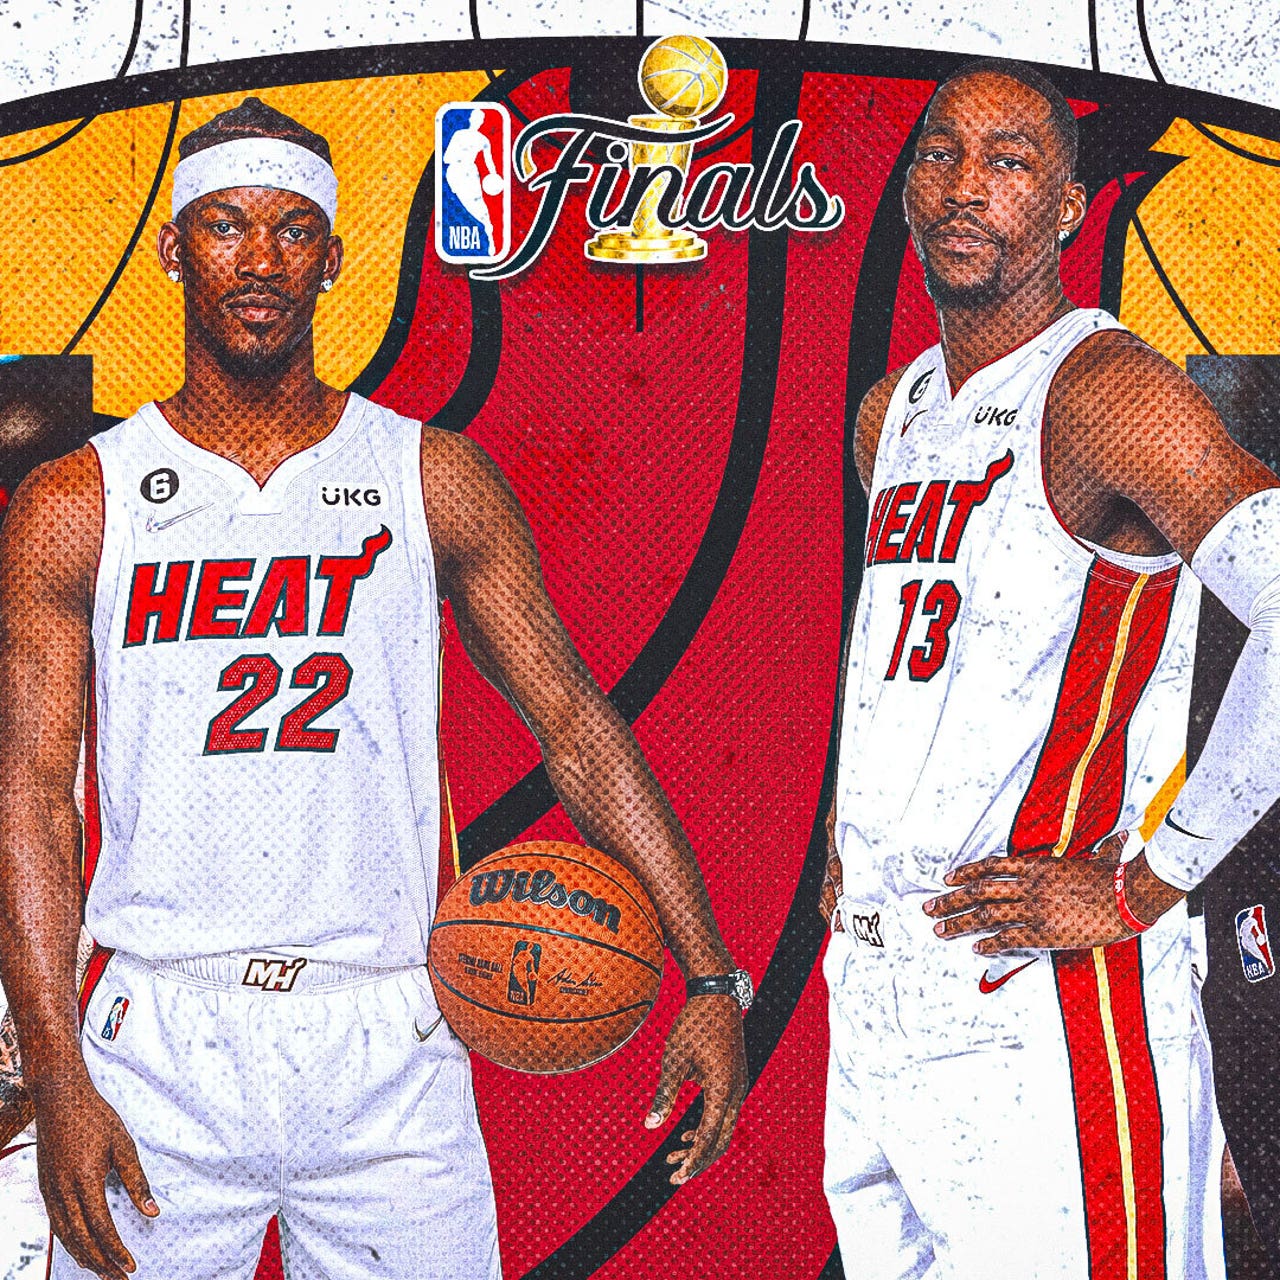 The Miami Heat won its first NBA championship 10 years ago in 2006